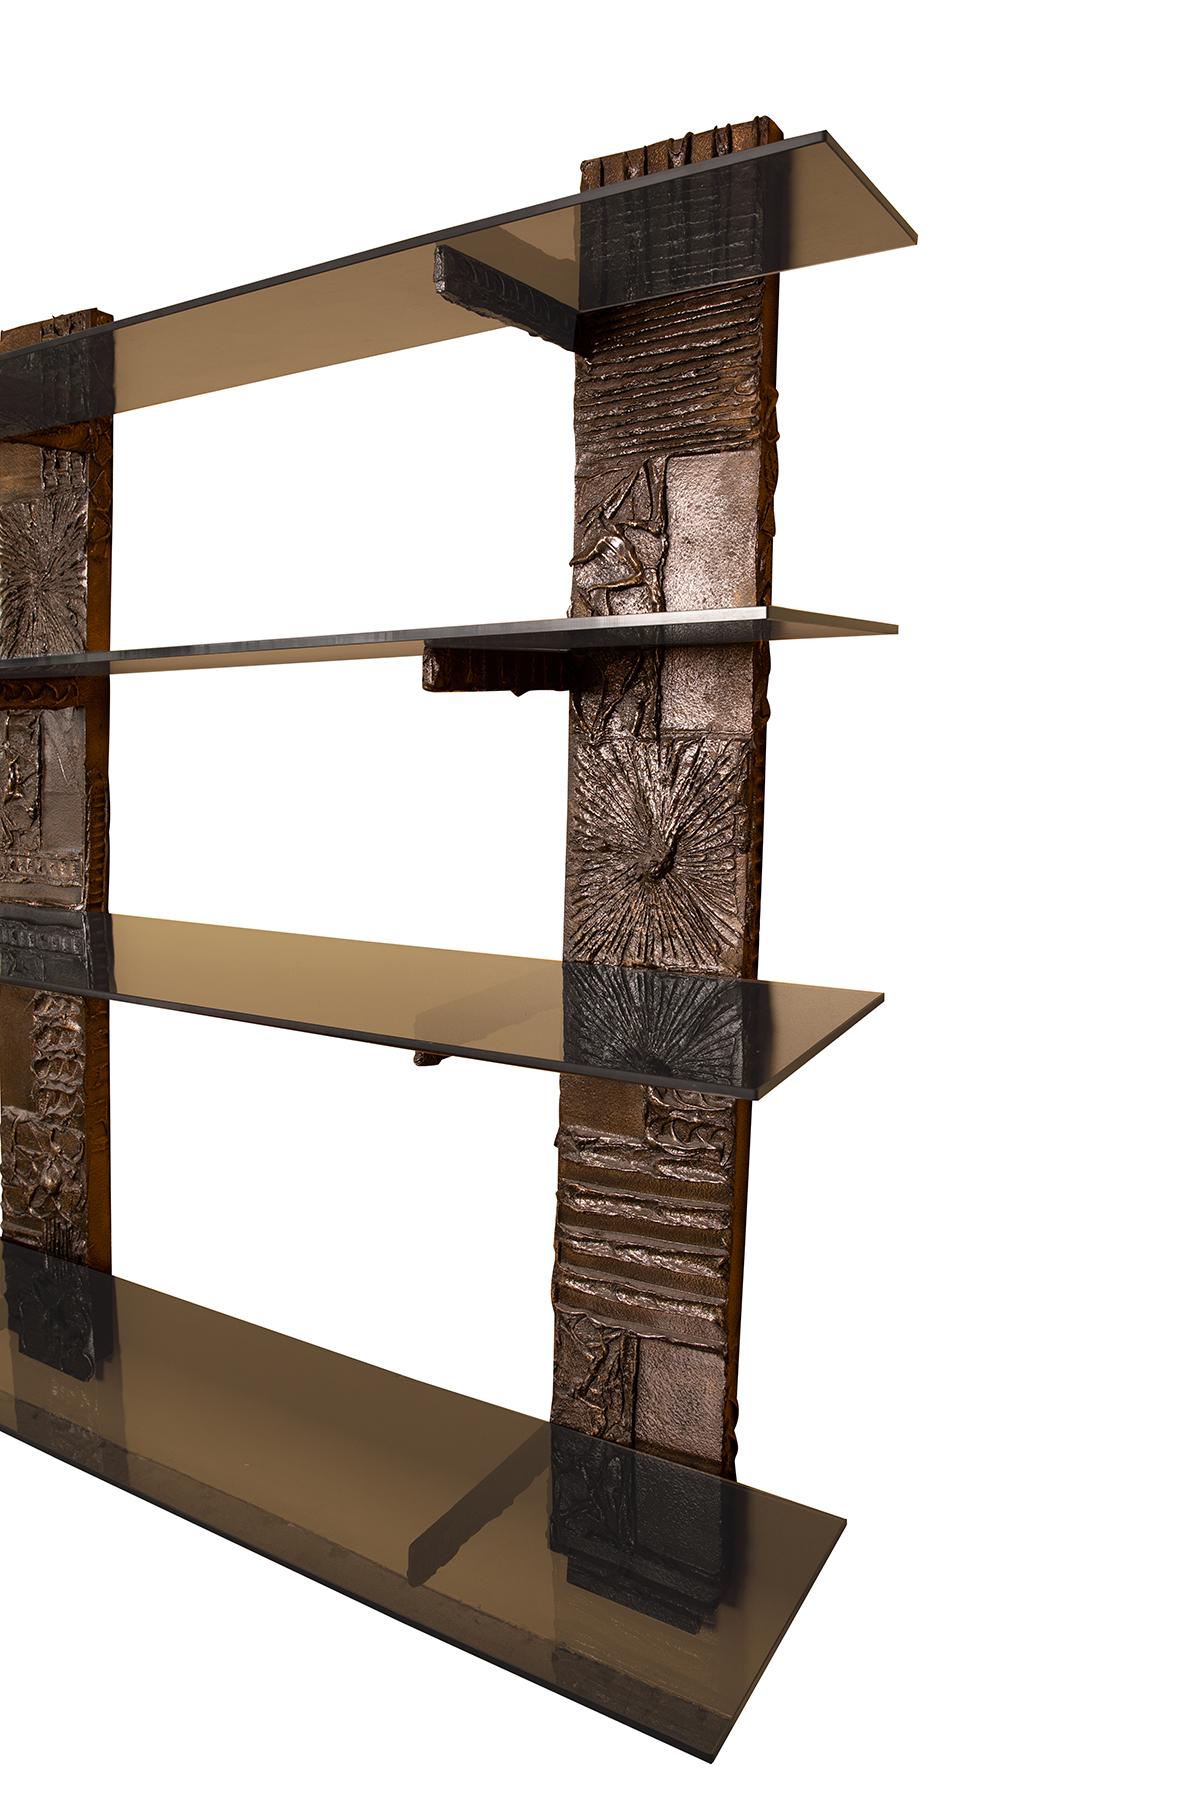 Sculpted bronze resin shelving unit with 4 smoke-colored glass shelves by American designer Paul Evans. Signed PE 70.